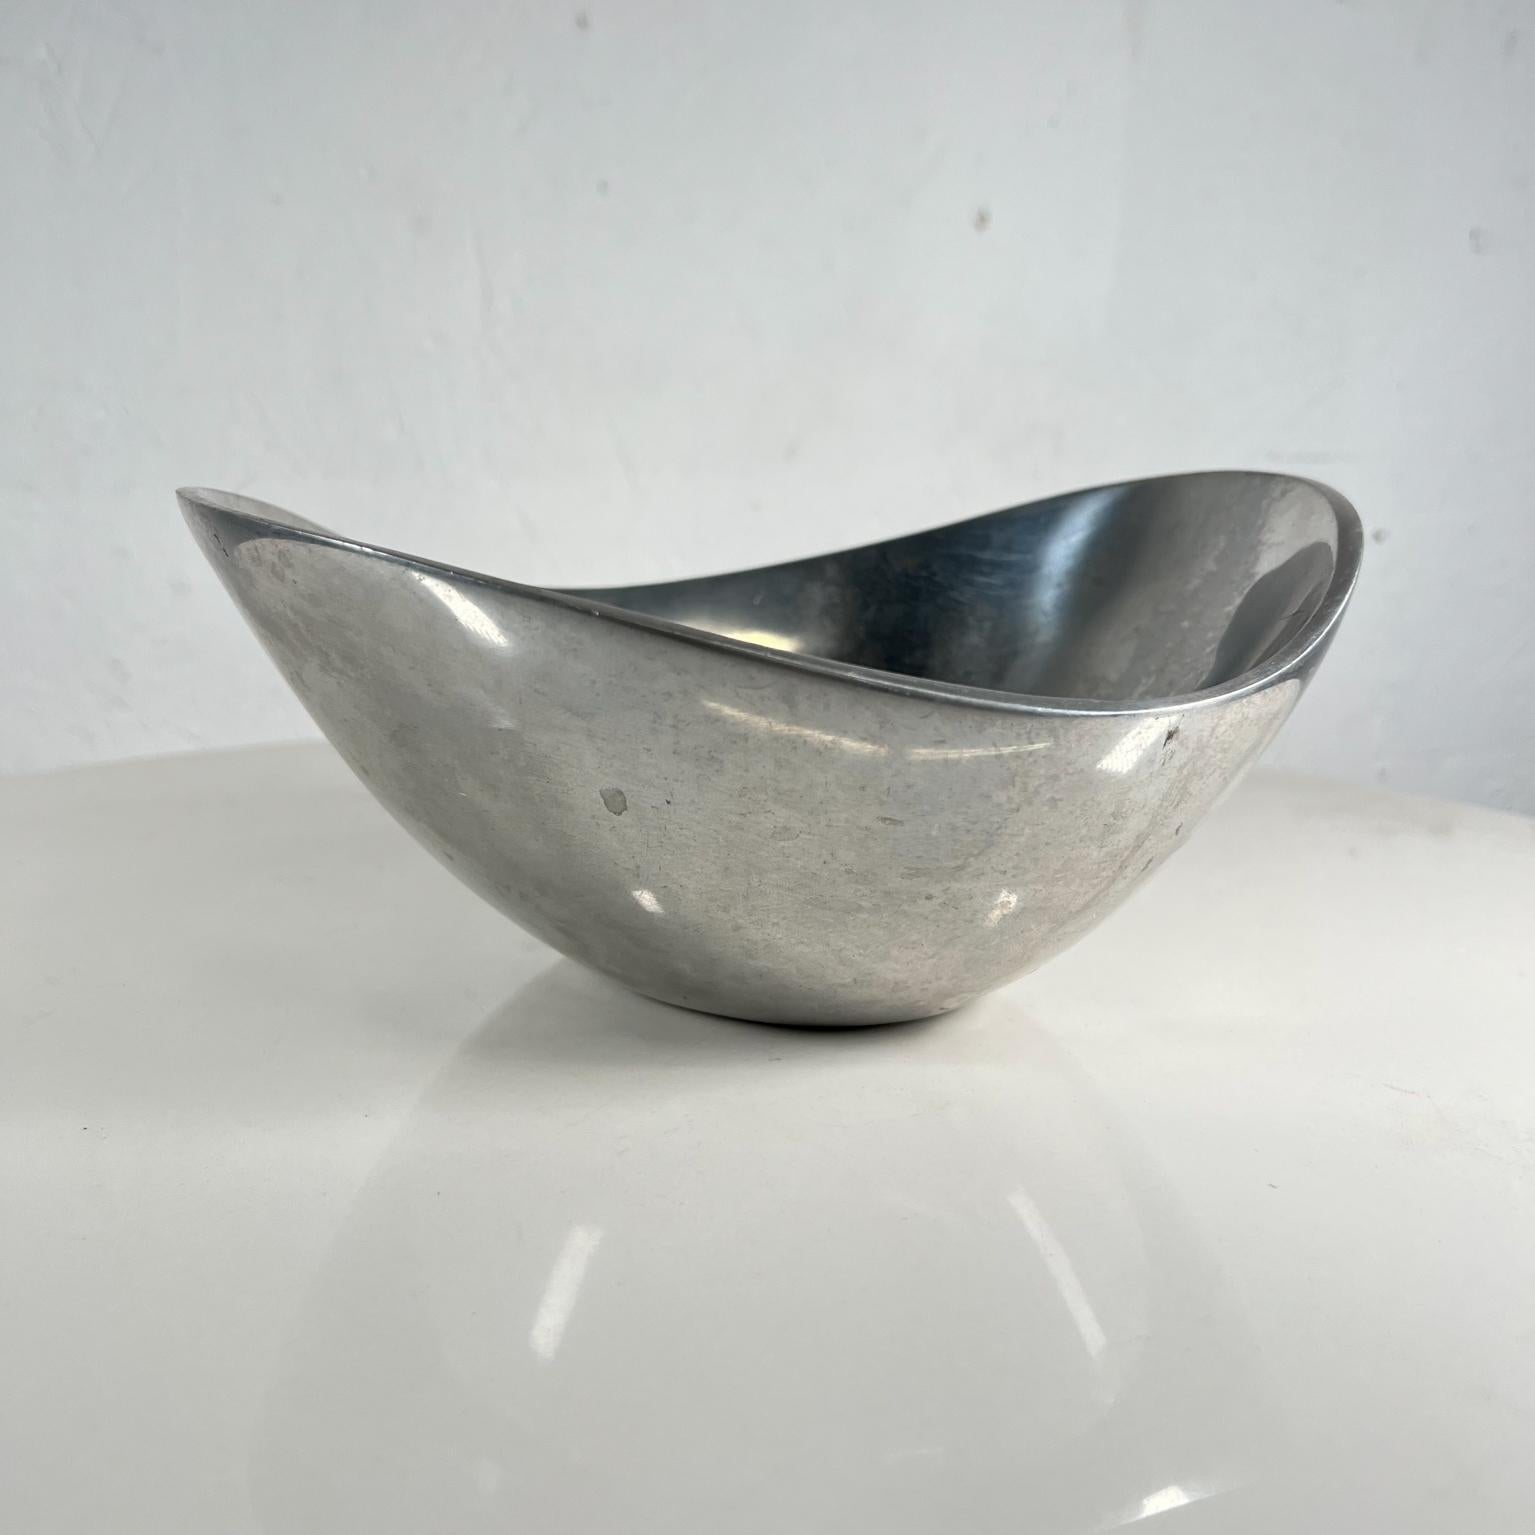 1960s Modern Nambé Vintage Bowl Butterfly Dish New Mexico
Made of Aluminum Alloy Metal
Made in New Mexico
4 tall x 8.75 w x 7.78 d
Organic shape
Stamped Nambe 569
Original preowned vintage condition.
Interior discoloration present.
See images please.